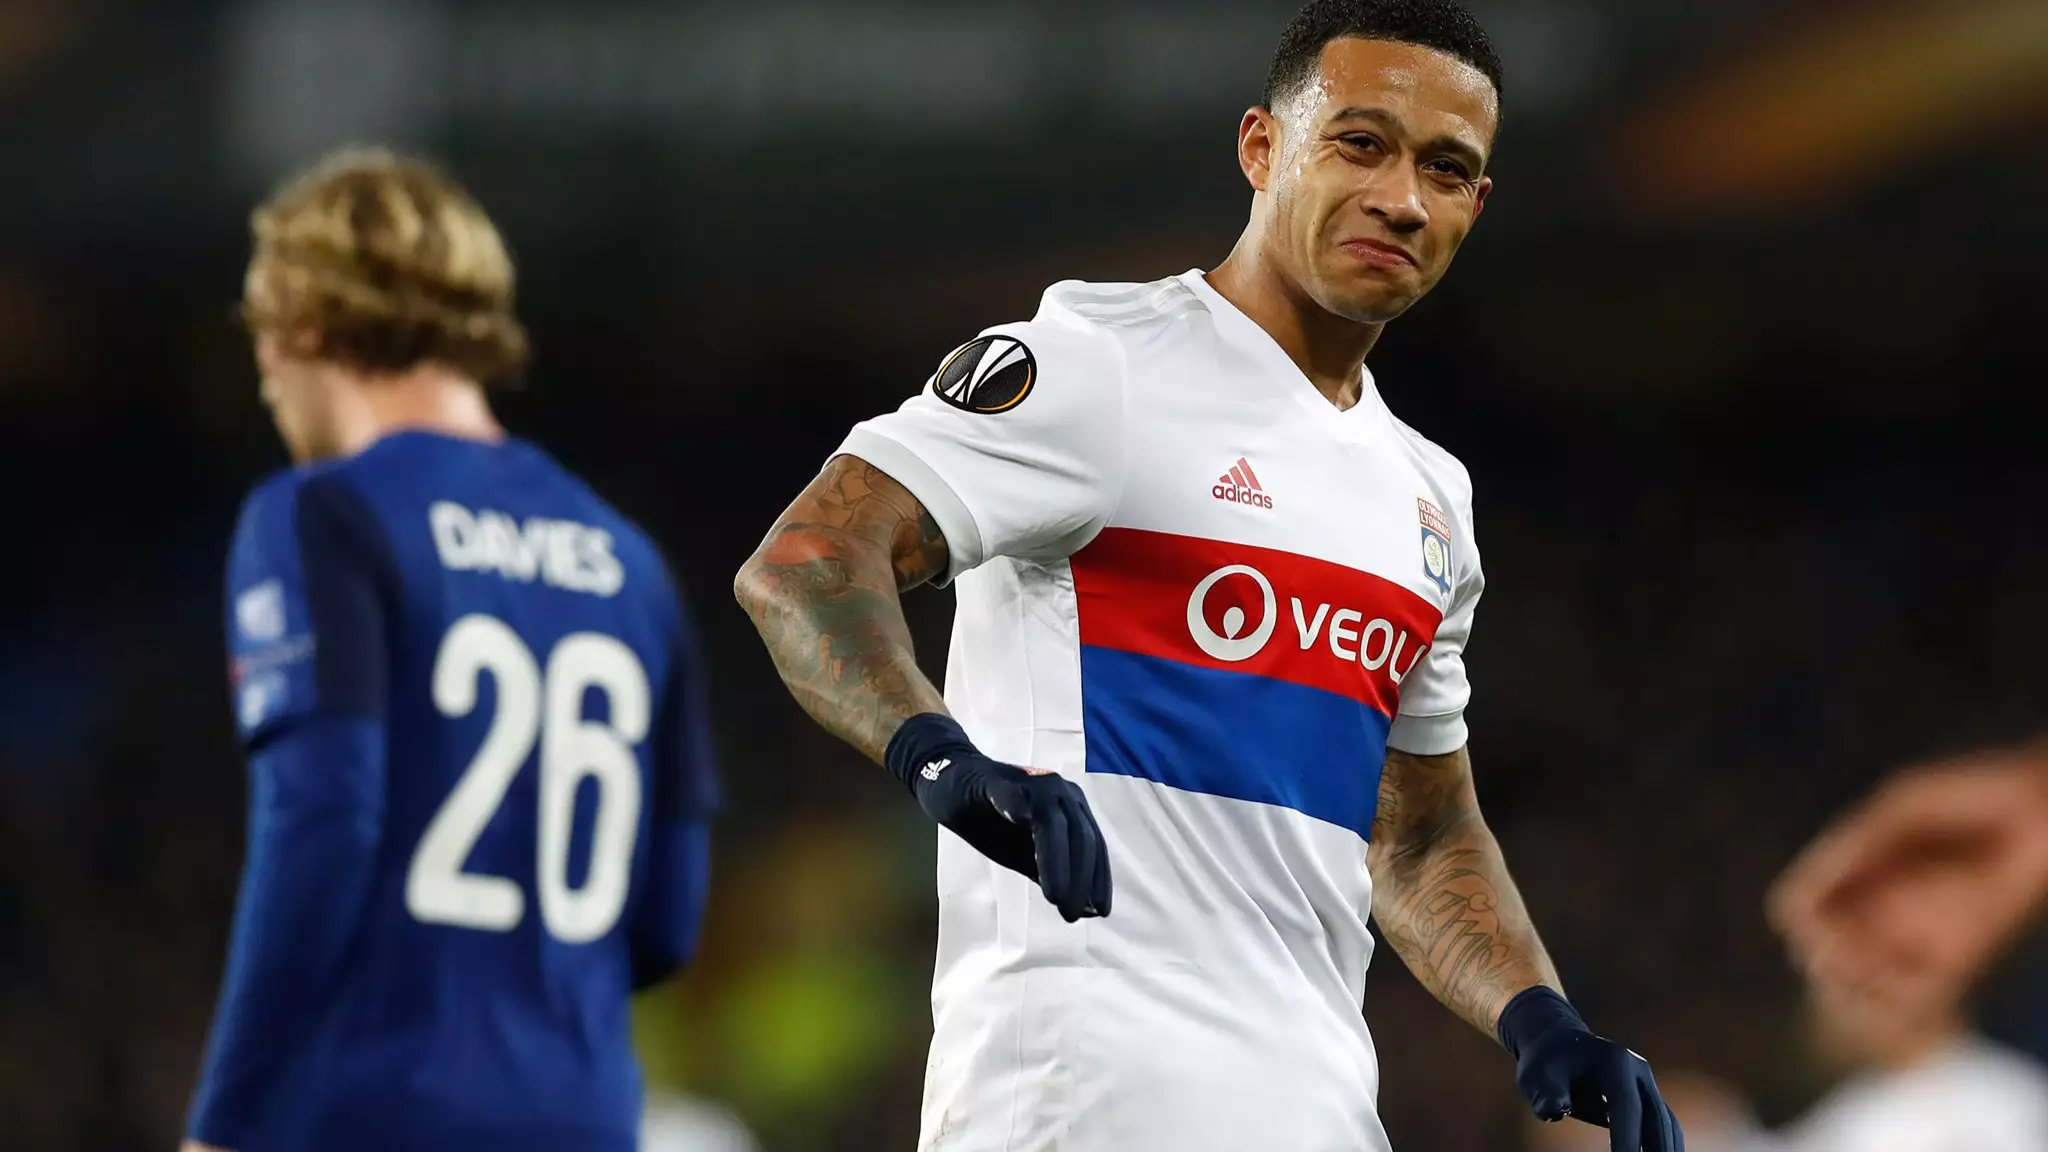 Manchester United Flop Memphis Depay Ends Stunning Season With Hat-Trick